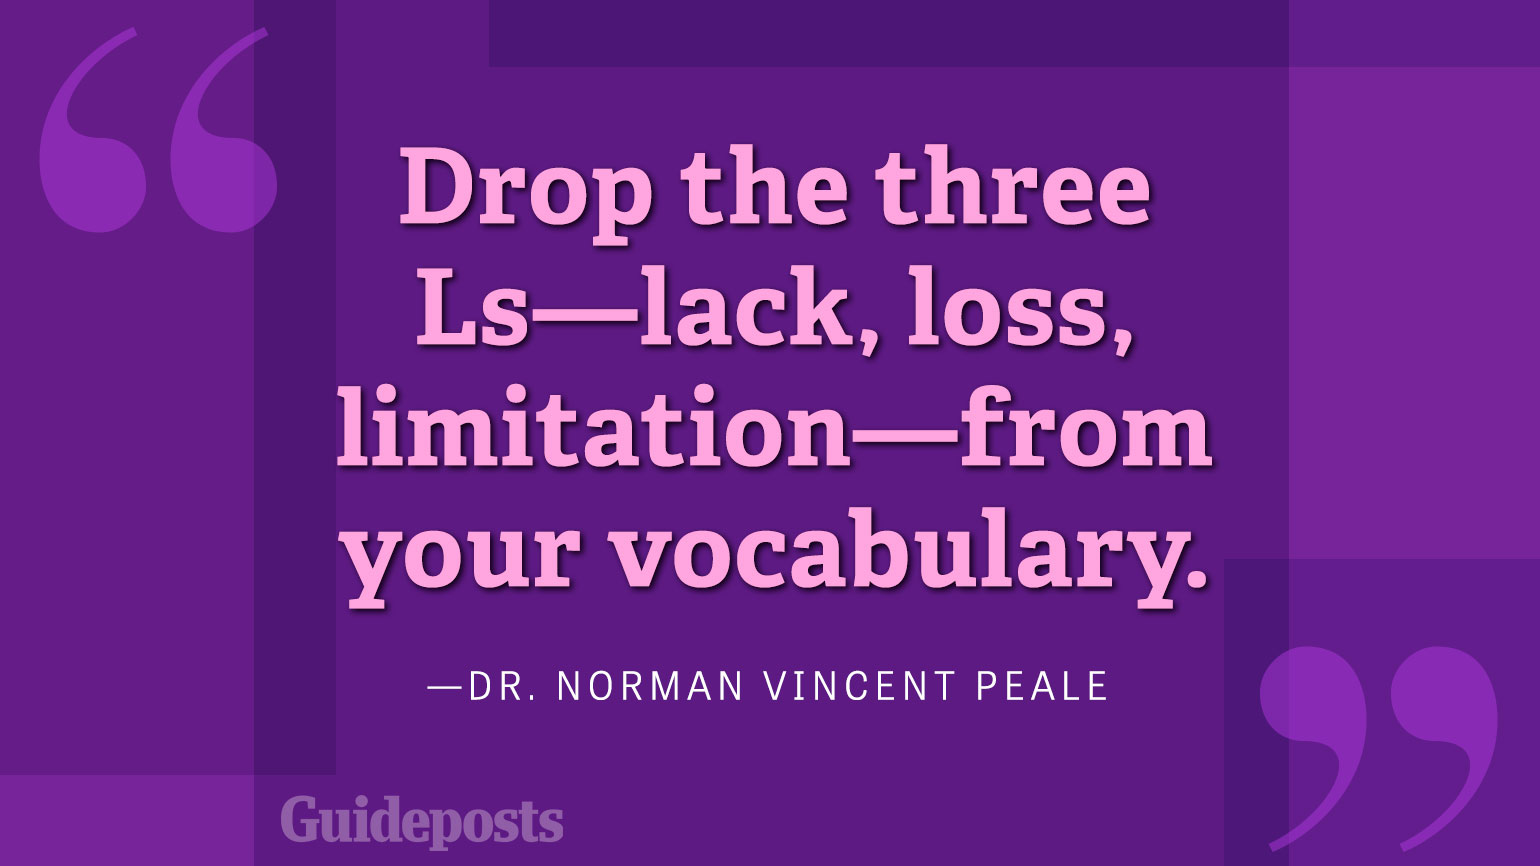 Drop the three Ls—lack, loss, limitation—from your vocabulary.